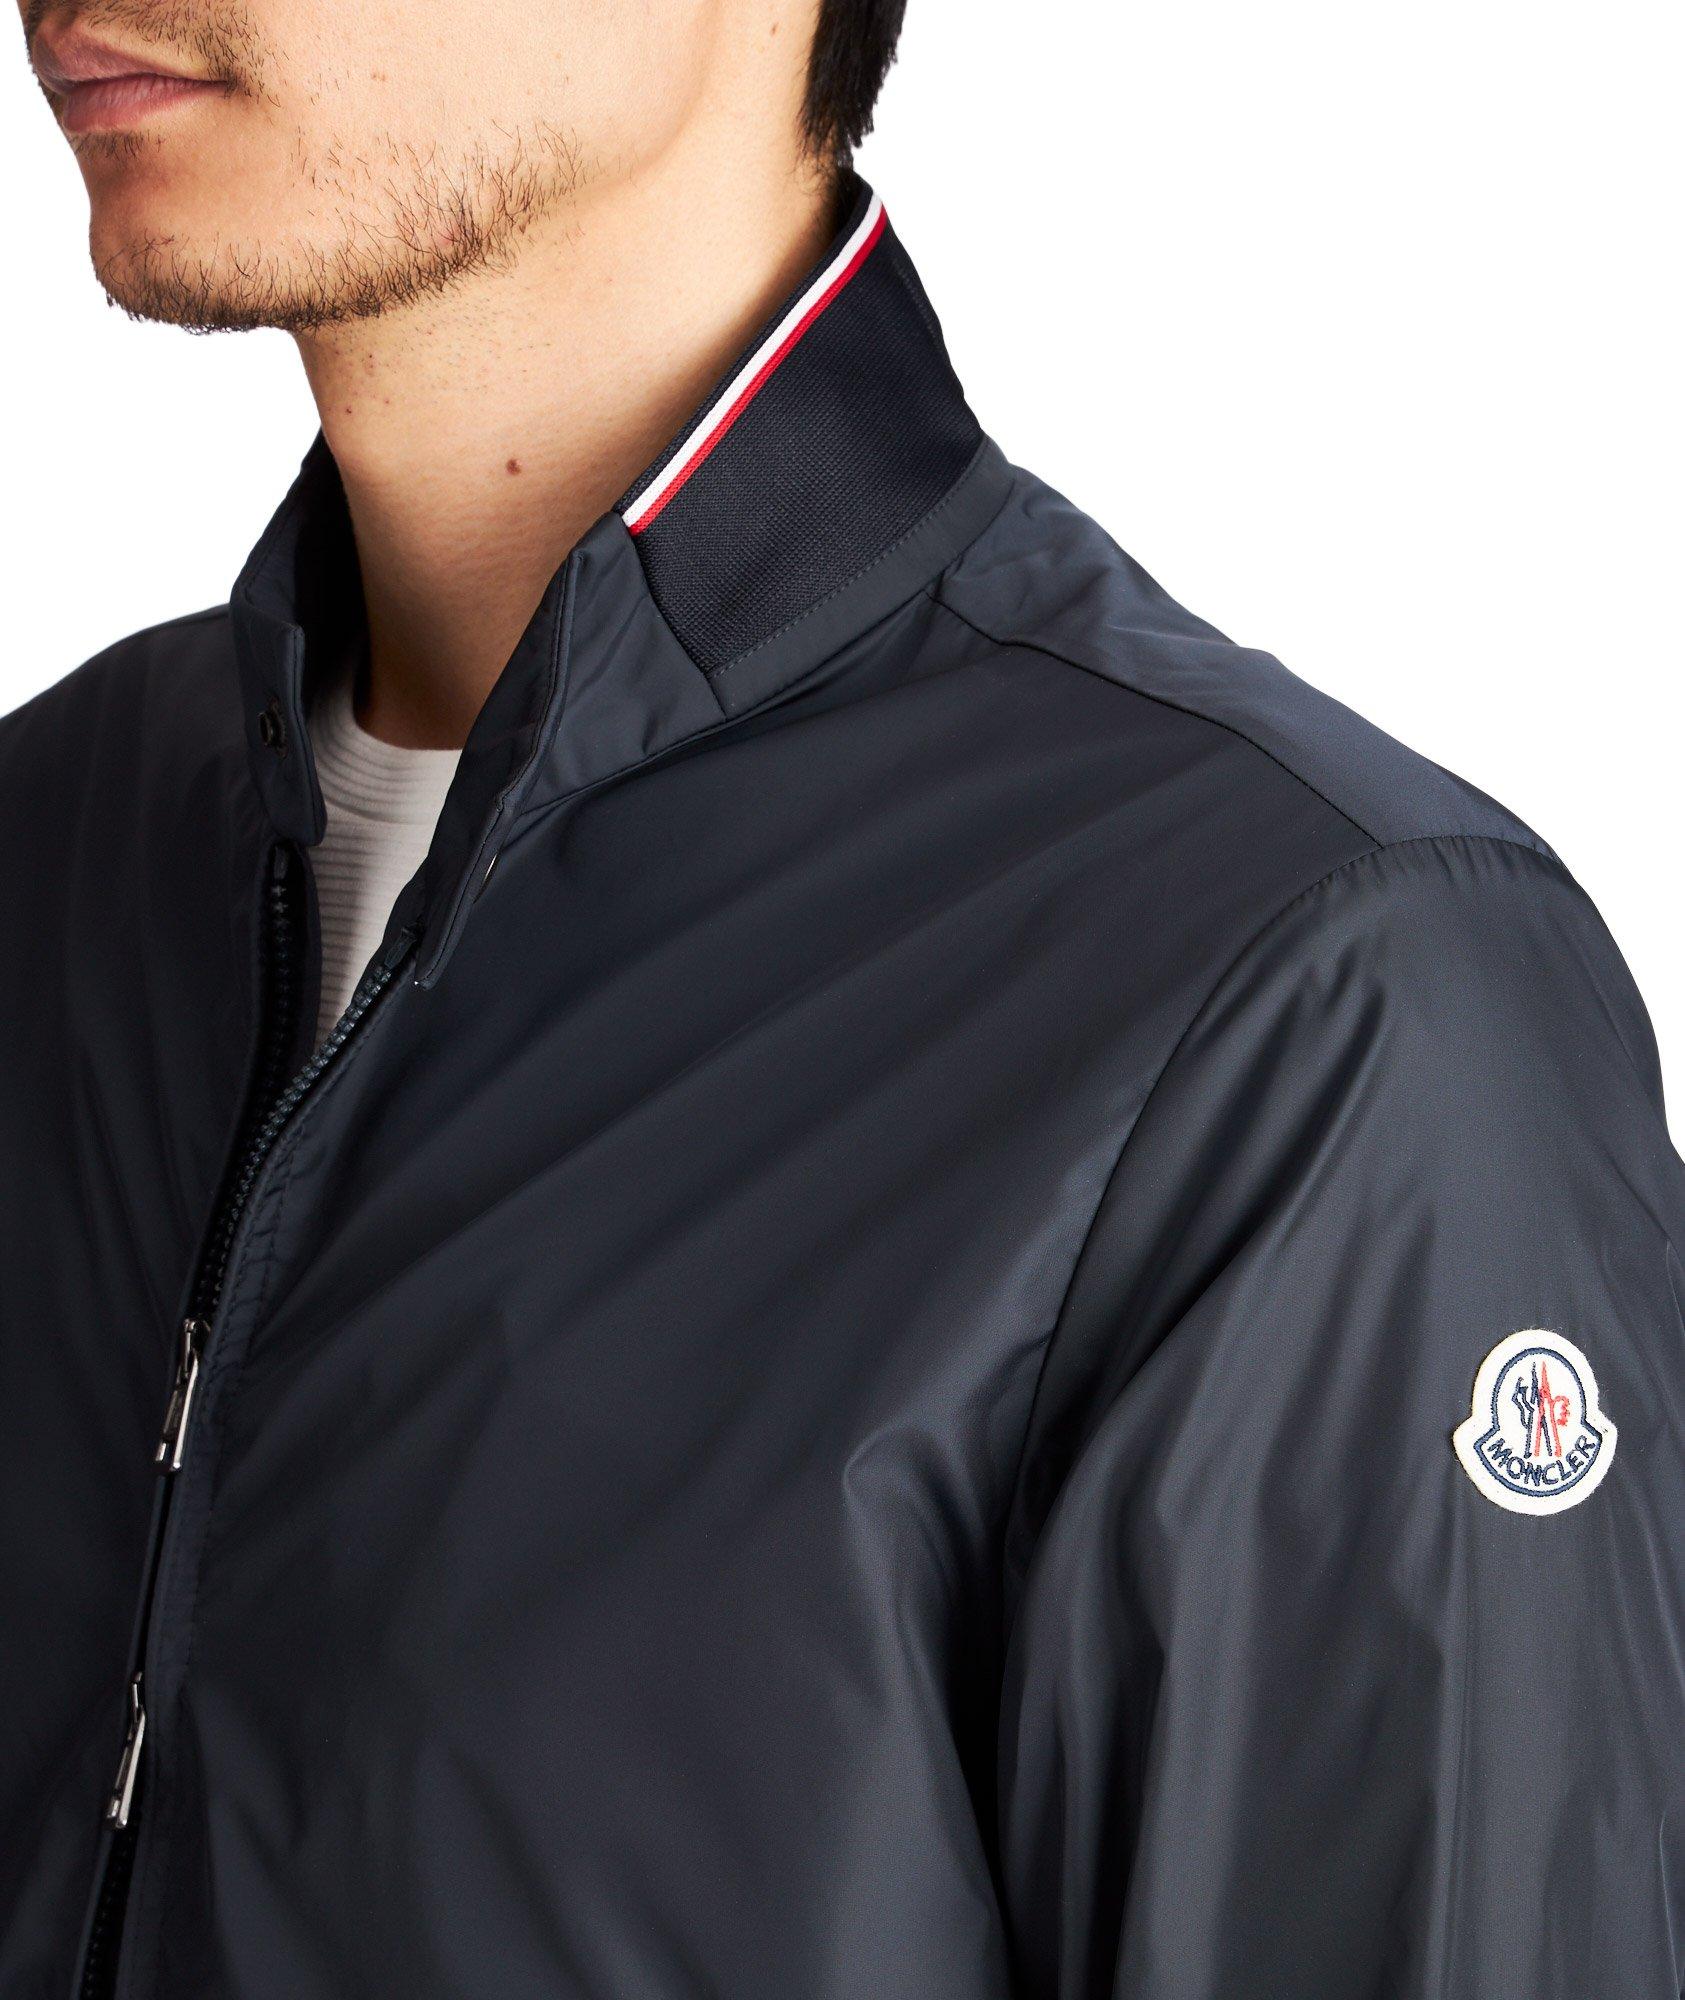 Reppe Water-Resistant Bomber image 2